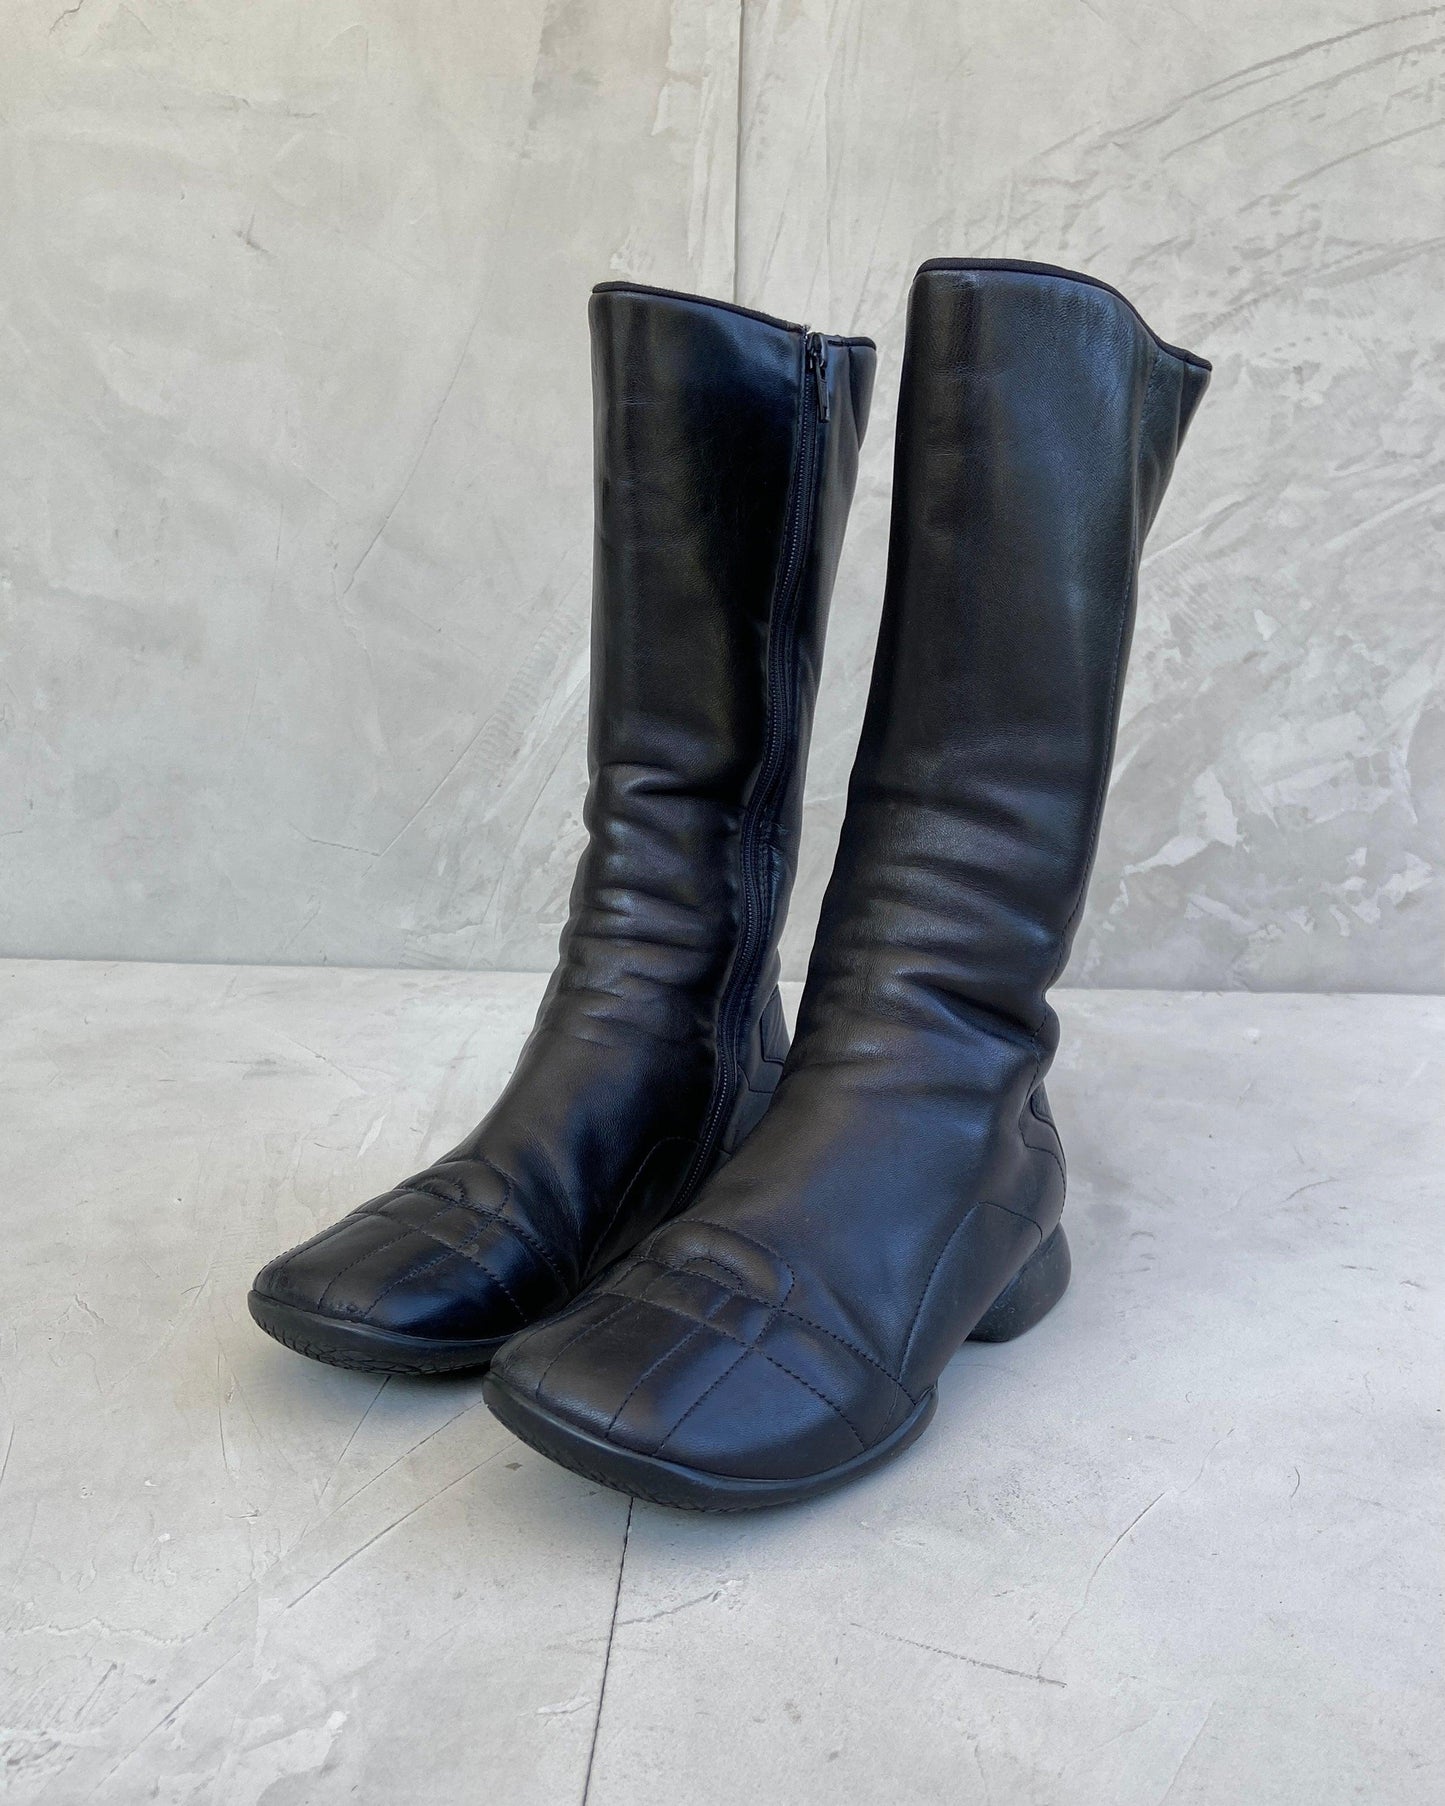 PRADA SPORT 90'S SQUARE LEATHER BOOTS - EU 35.5 / UK 3 - Known Source